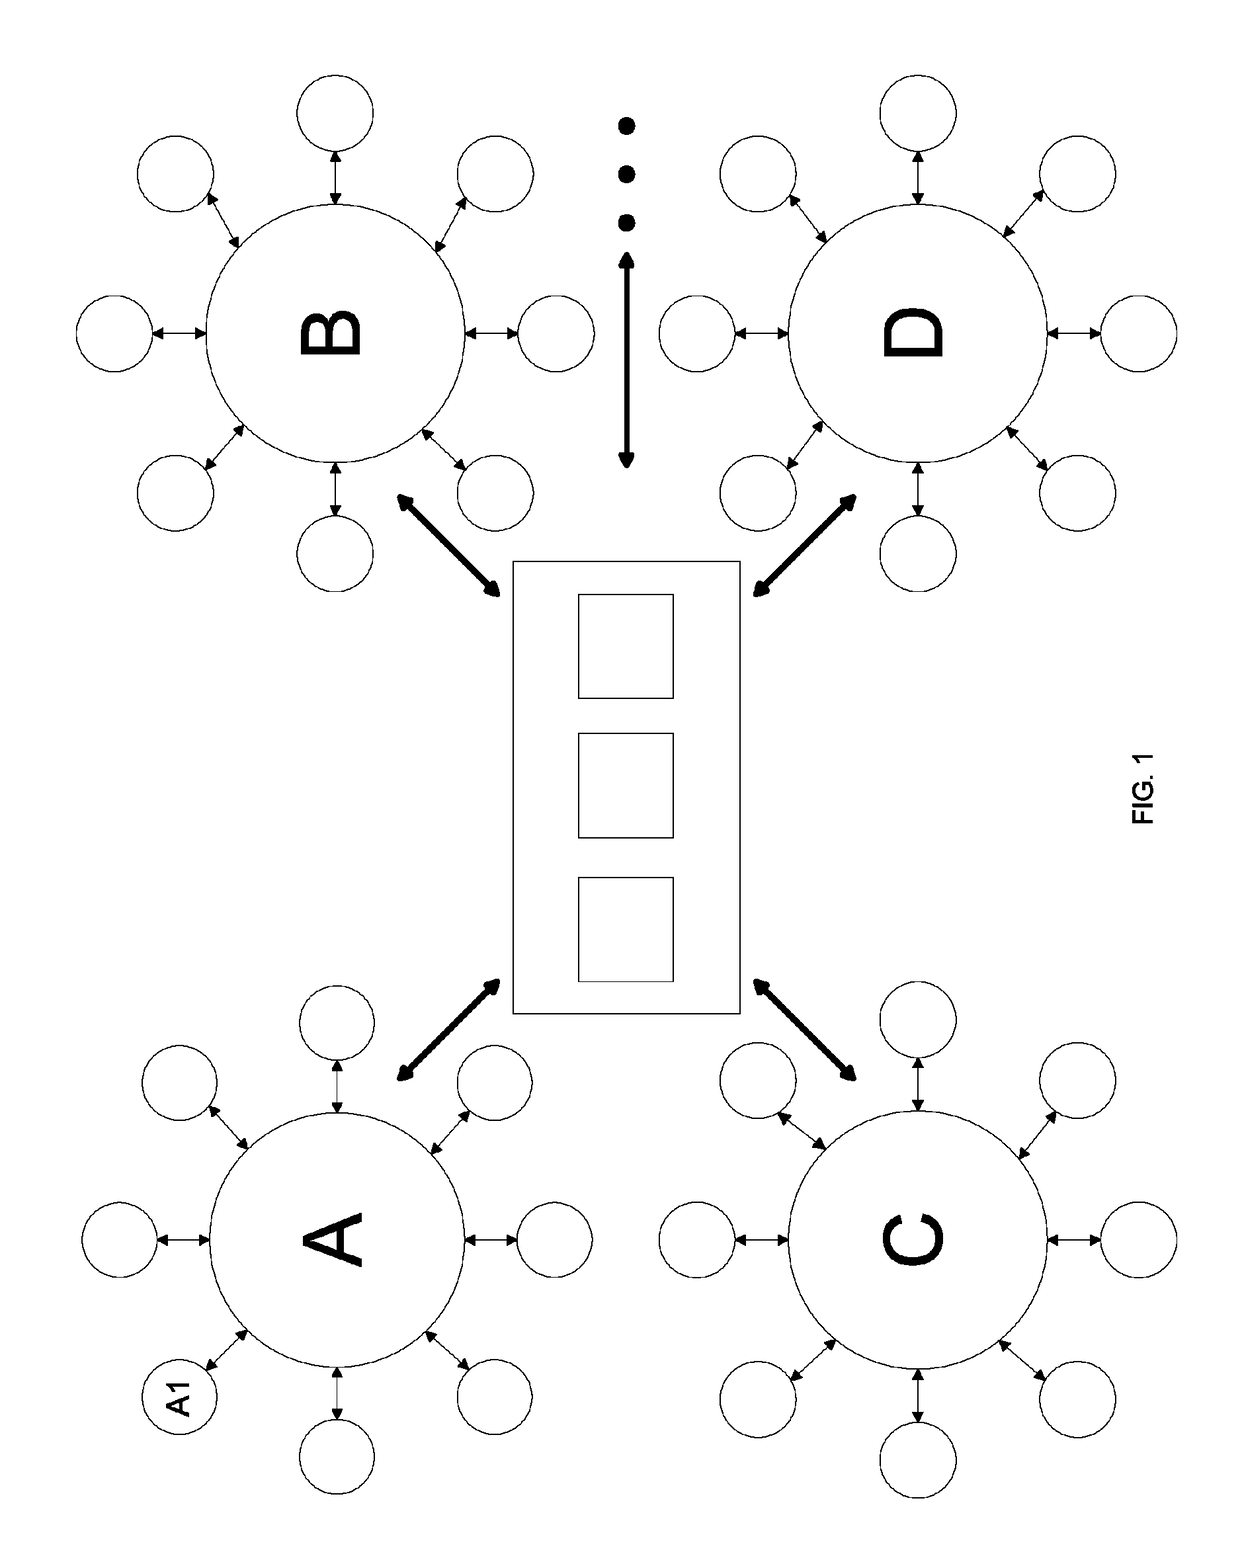 Systems and methods of sharing information through a tag-based consortium